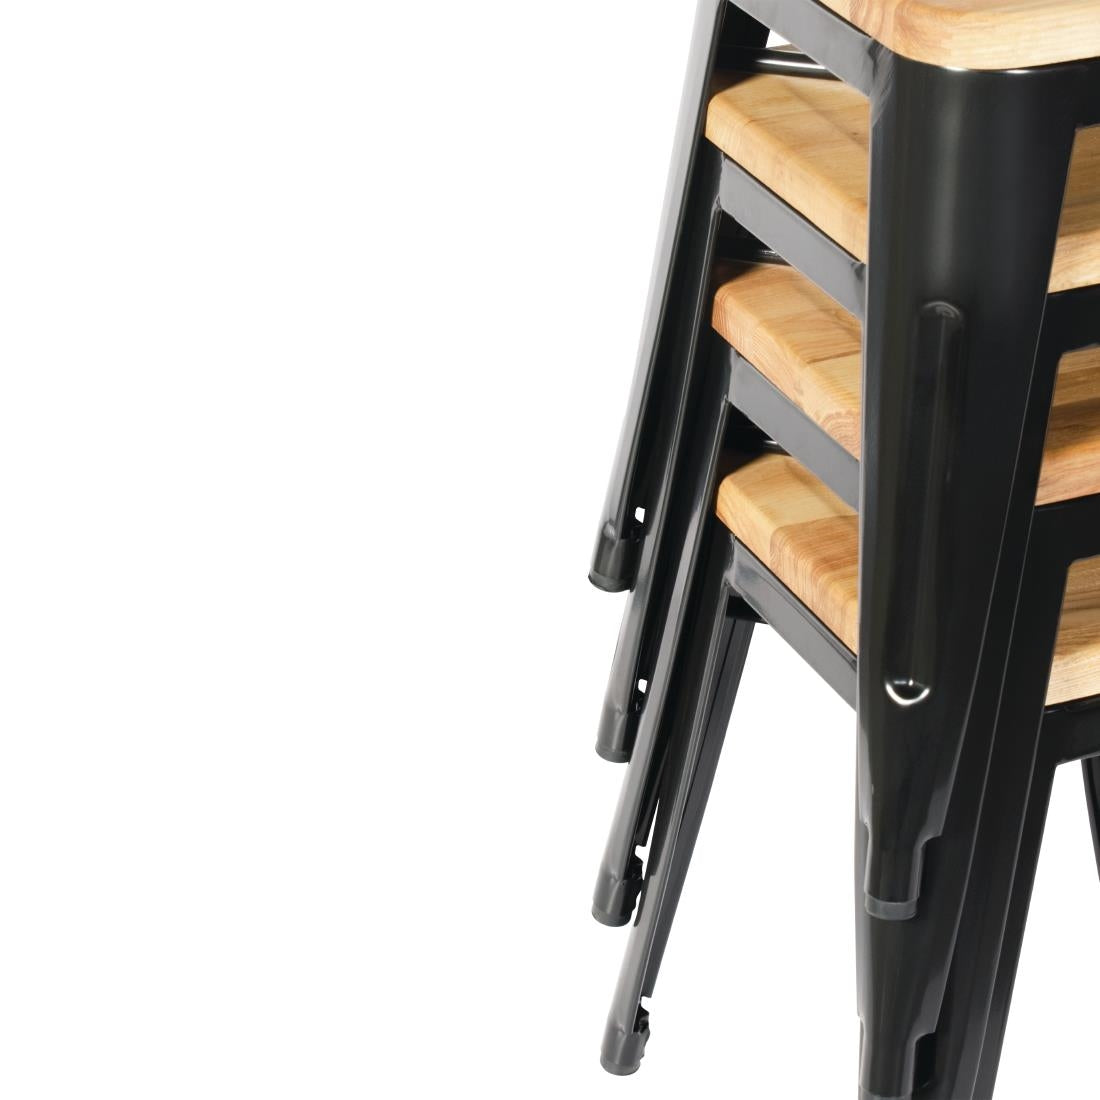 Bolero Bistro Low Stools with Wooden Seat Pad (Pack of 4) JD Catering Equipment Solutions Ltd